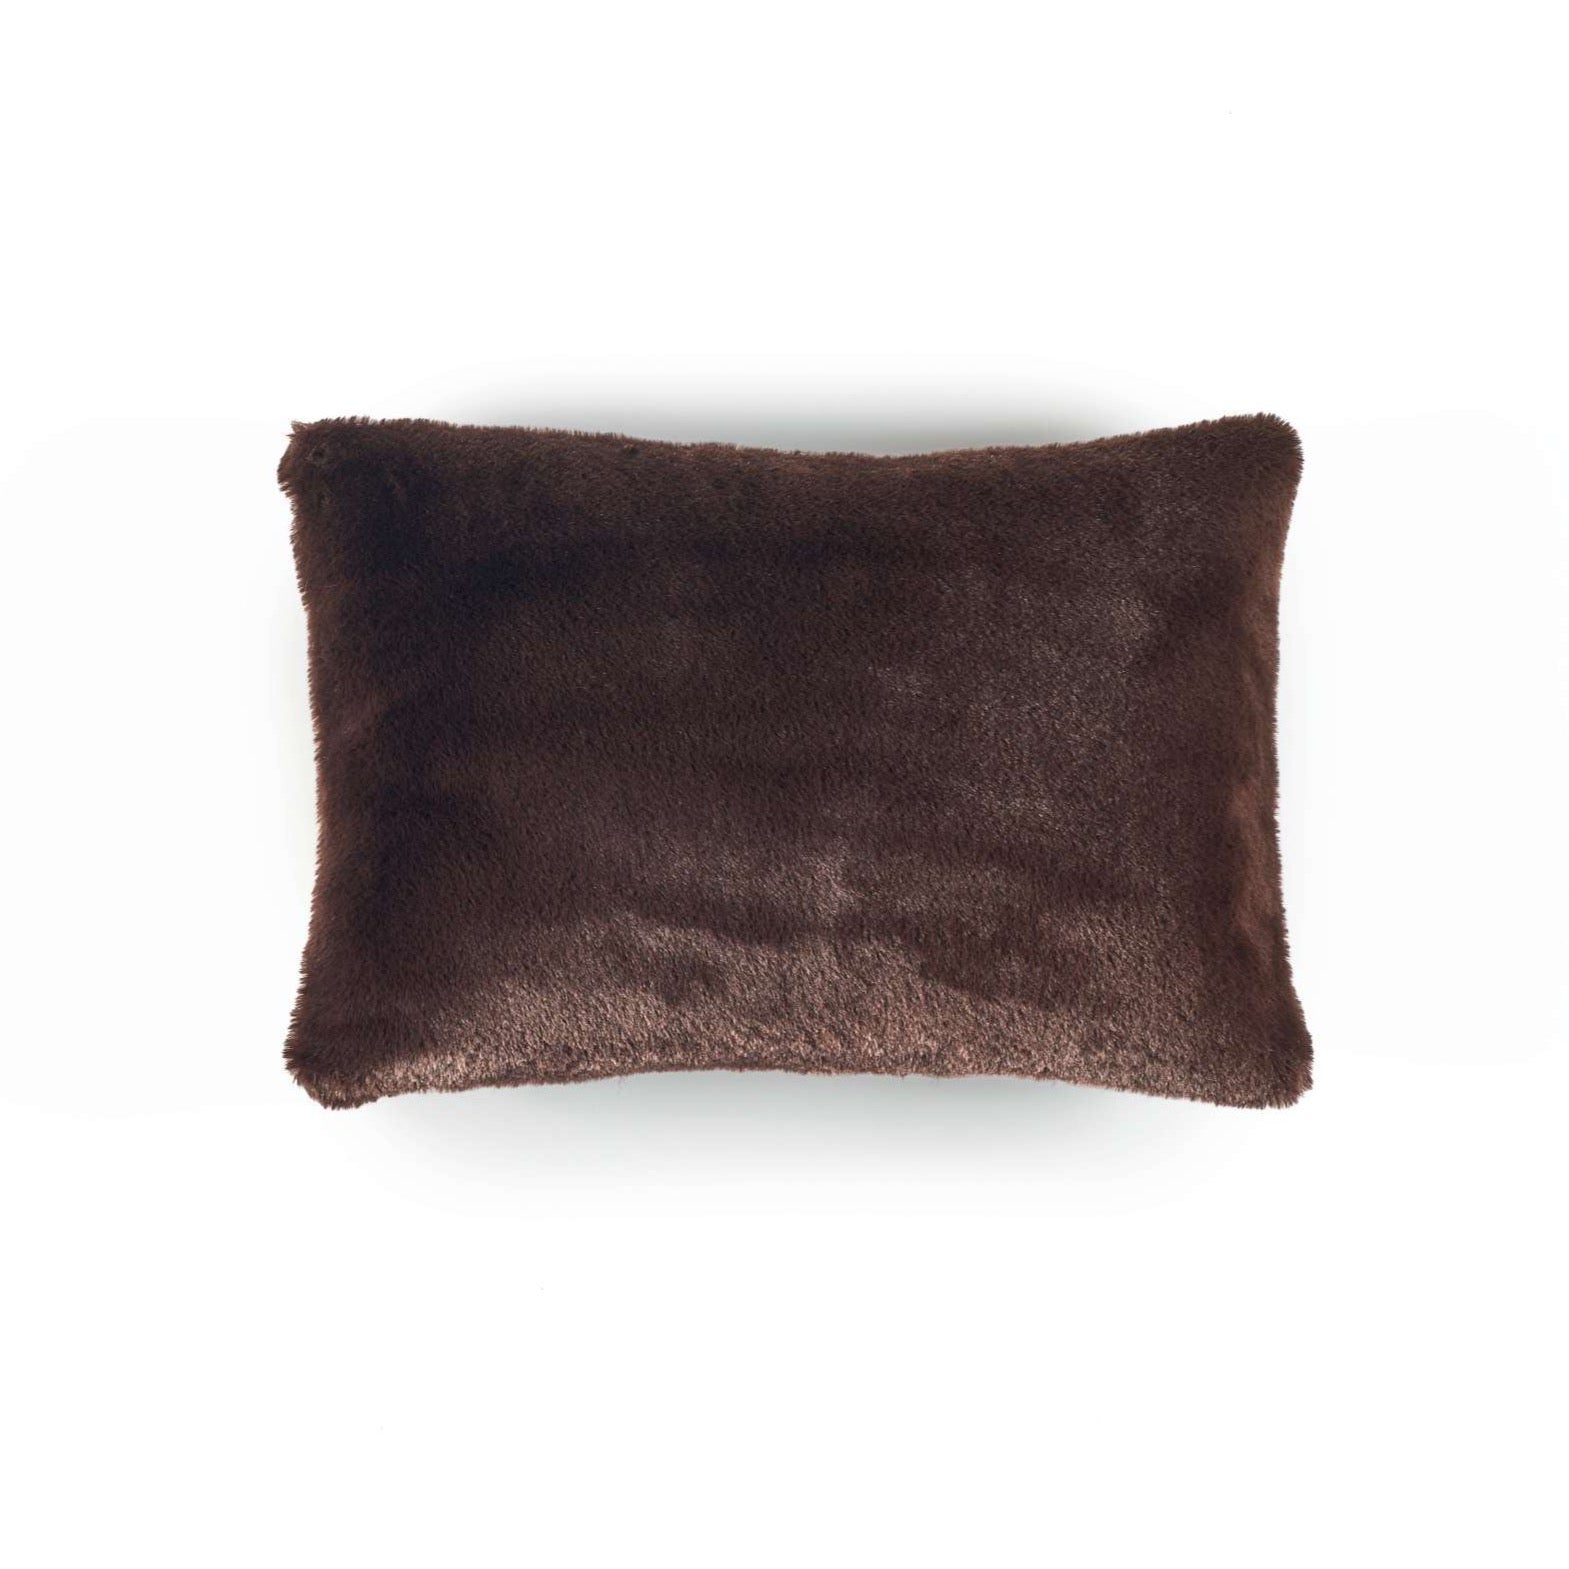 Winter CO 219 76 04 Ours Brun Small Cushion Cover